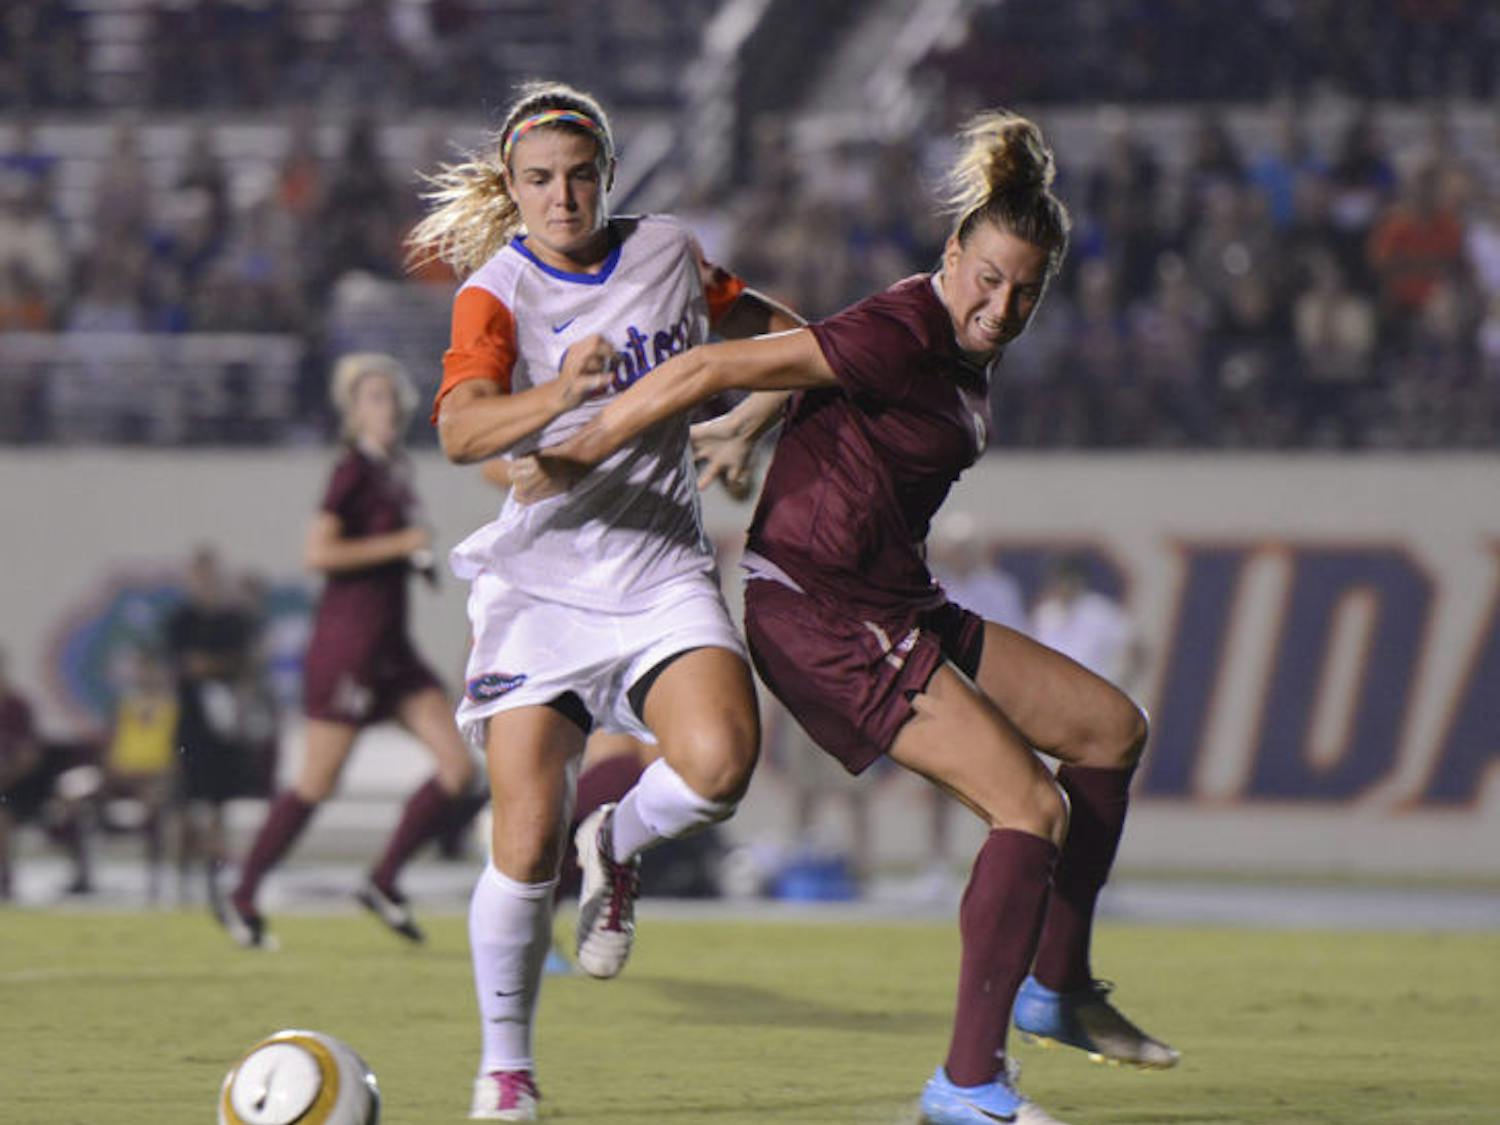 Savannah Jordan (left) pushes past an opponent during Florida’s 3-0 loss against Florida State on Aug. 30 at James G. Pressly Stadium.